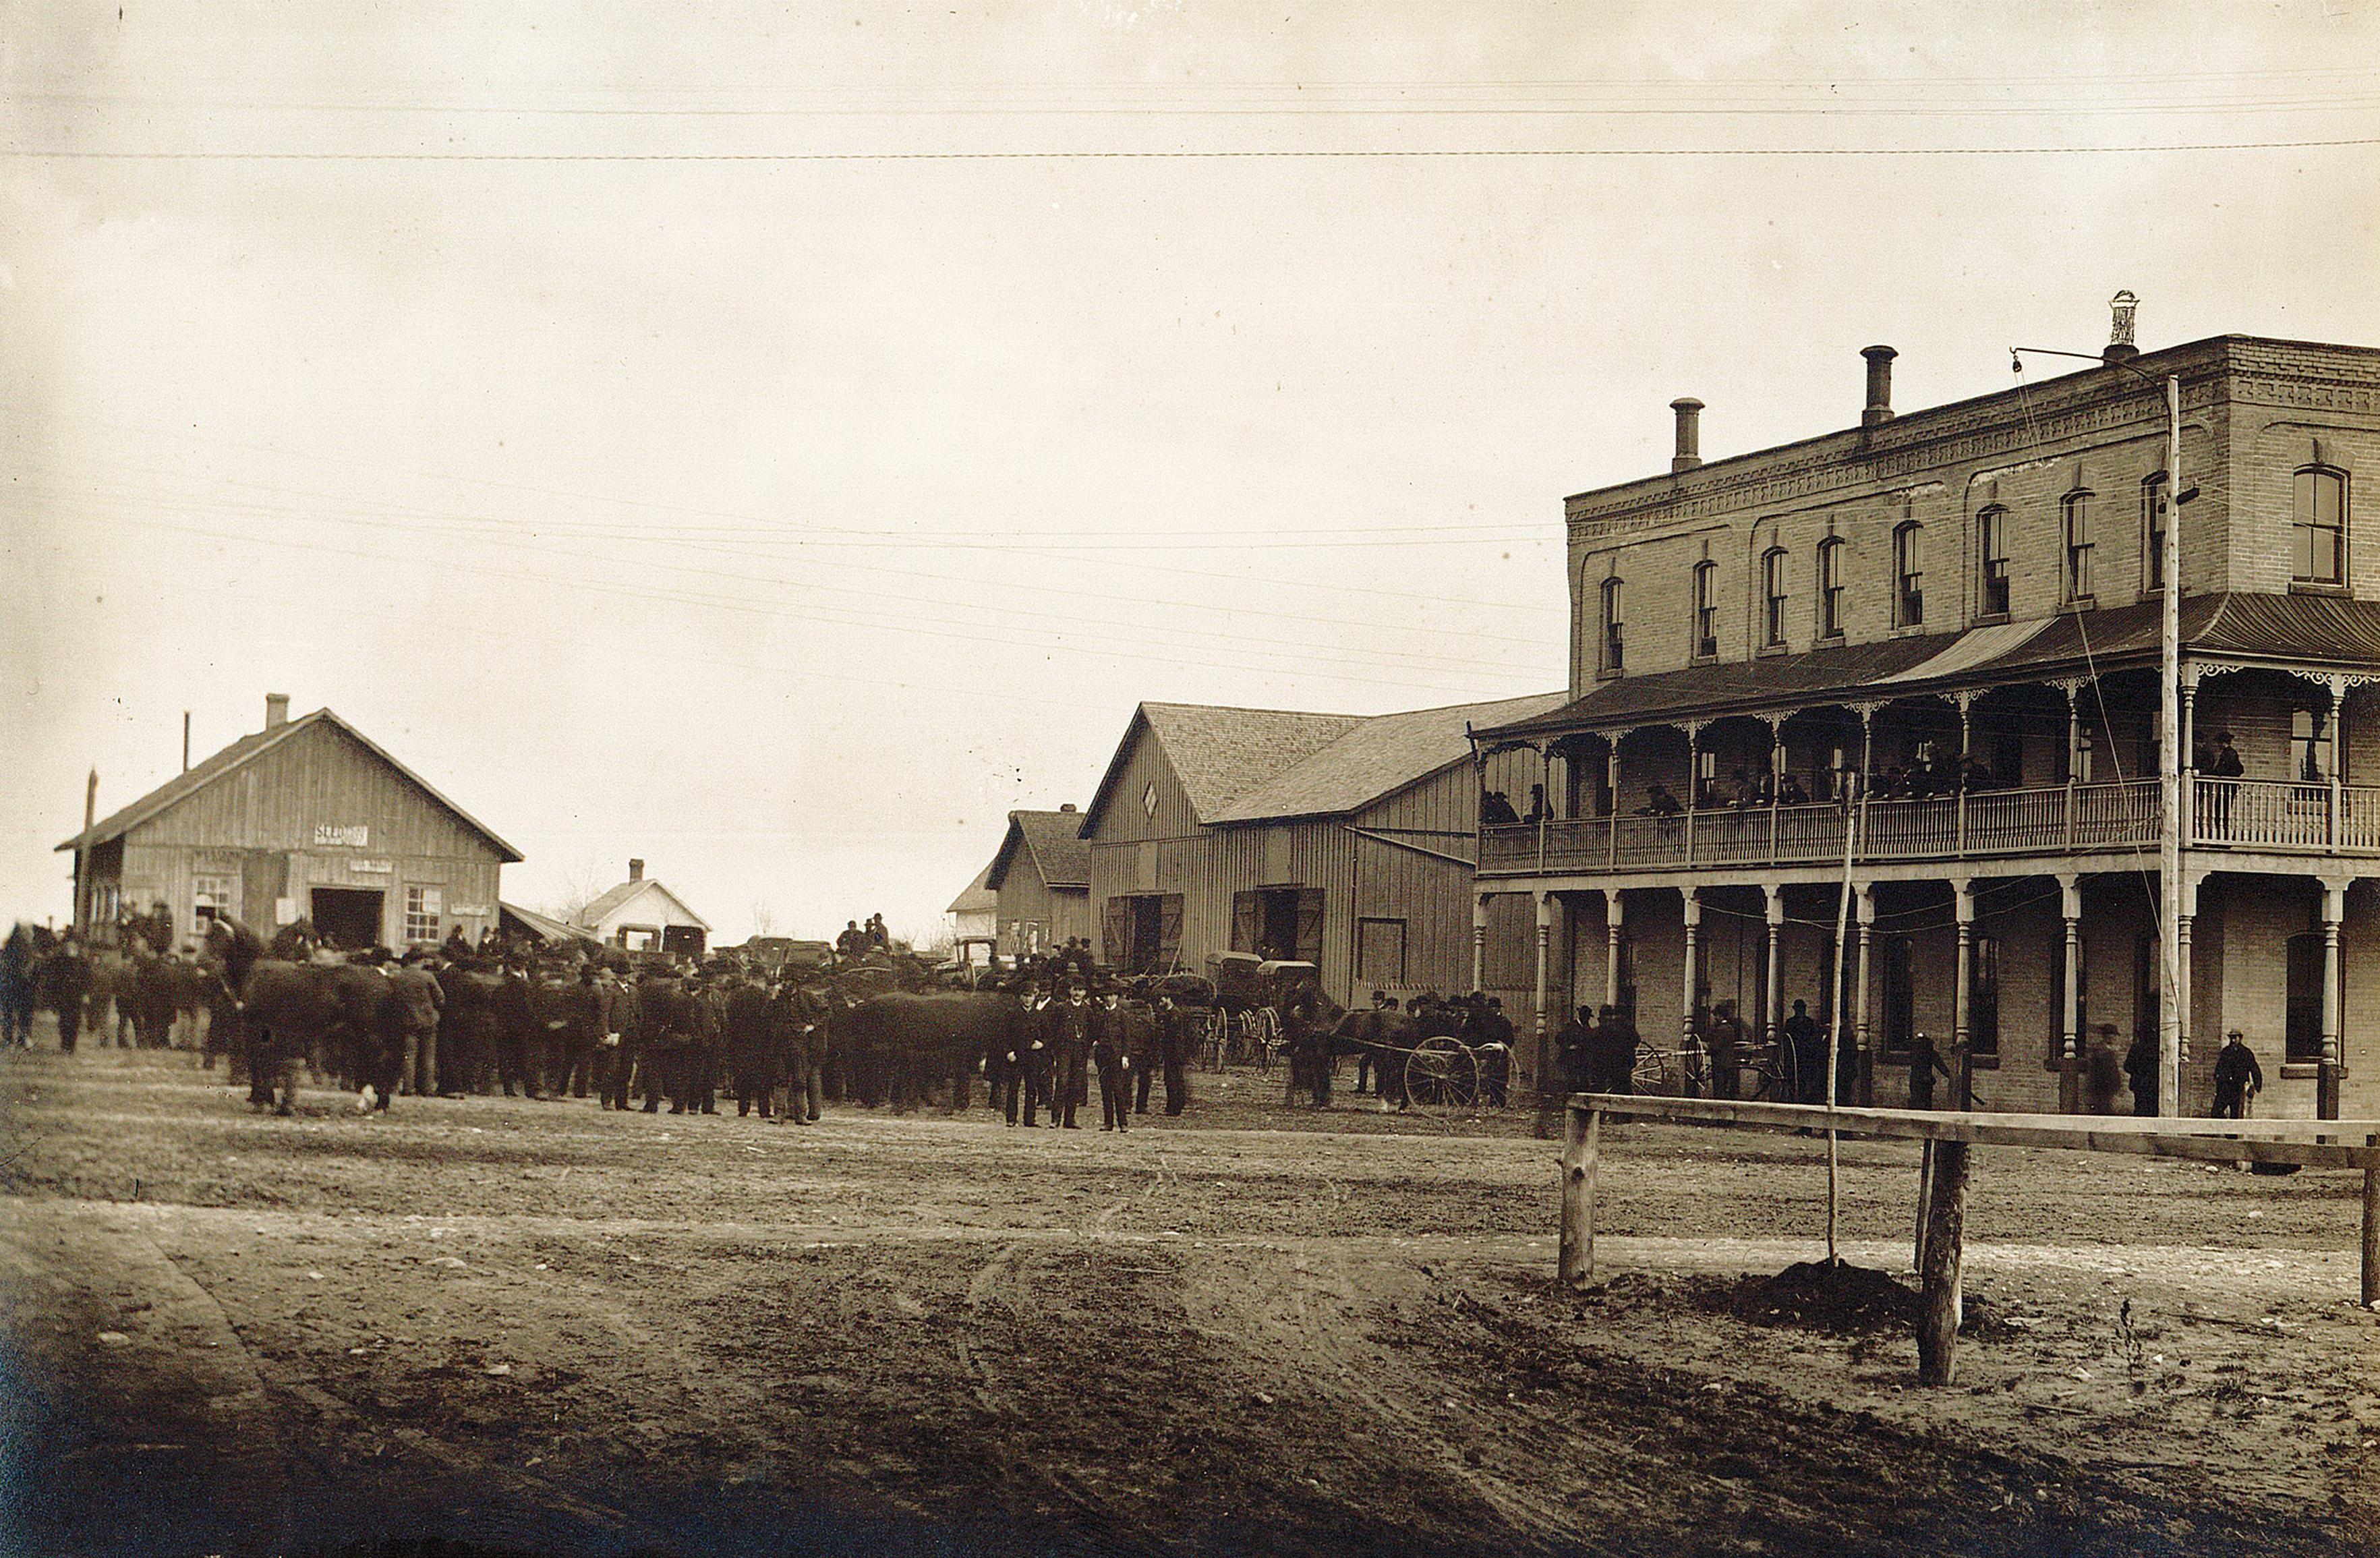 Photo of the Matheson House and market square in Tillsonburg. A crowd of people are in the square.